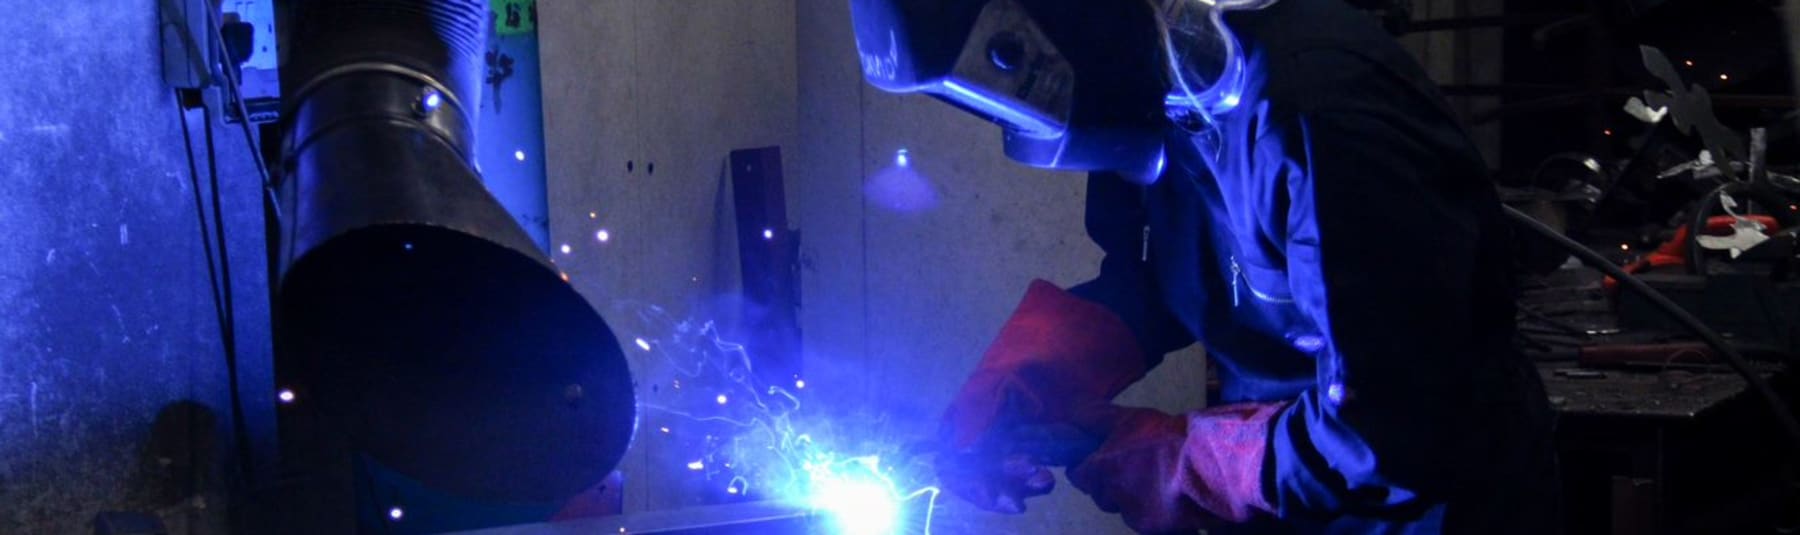 INTRODVYik_Introduction_To_Metalwork_And_Welding